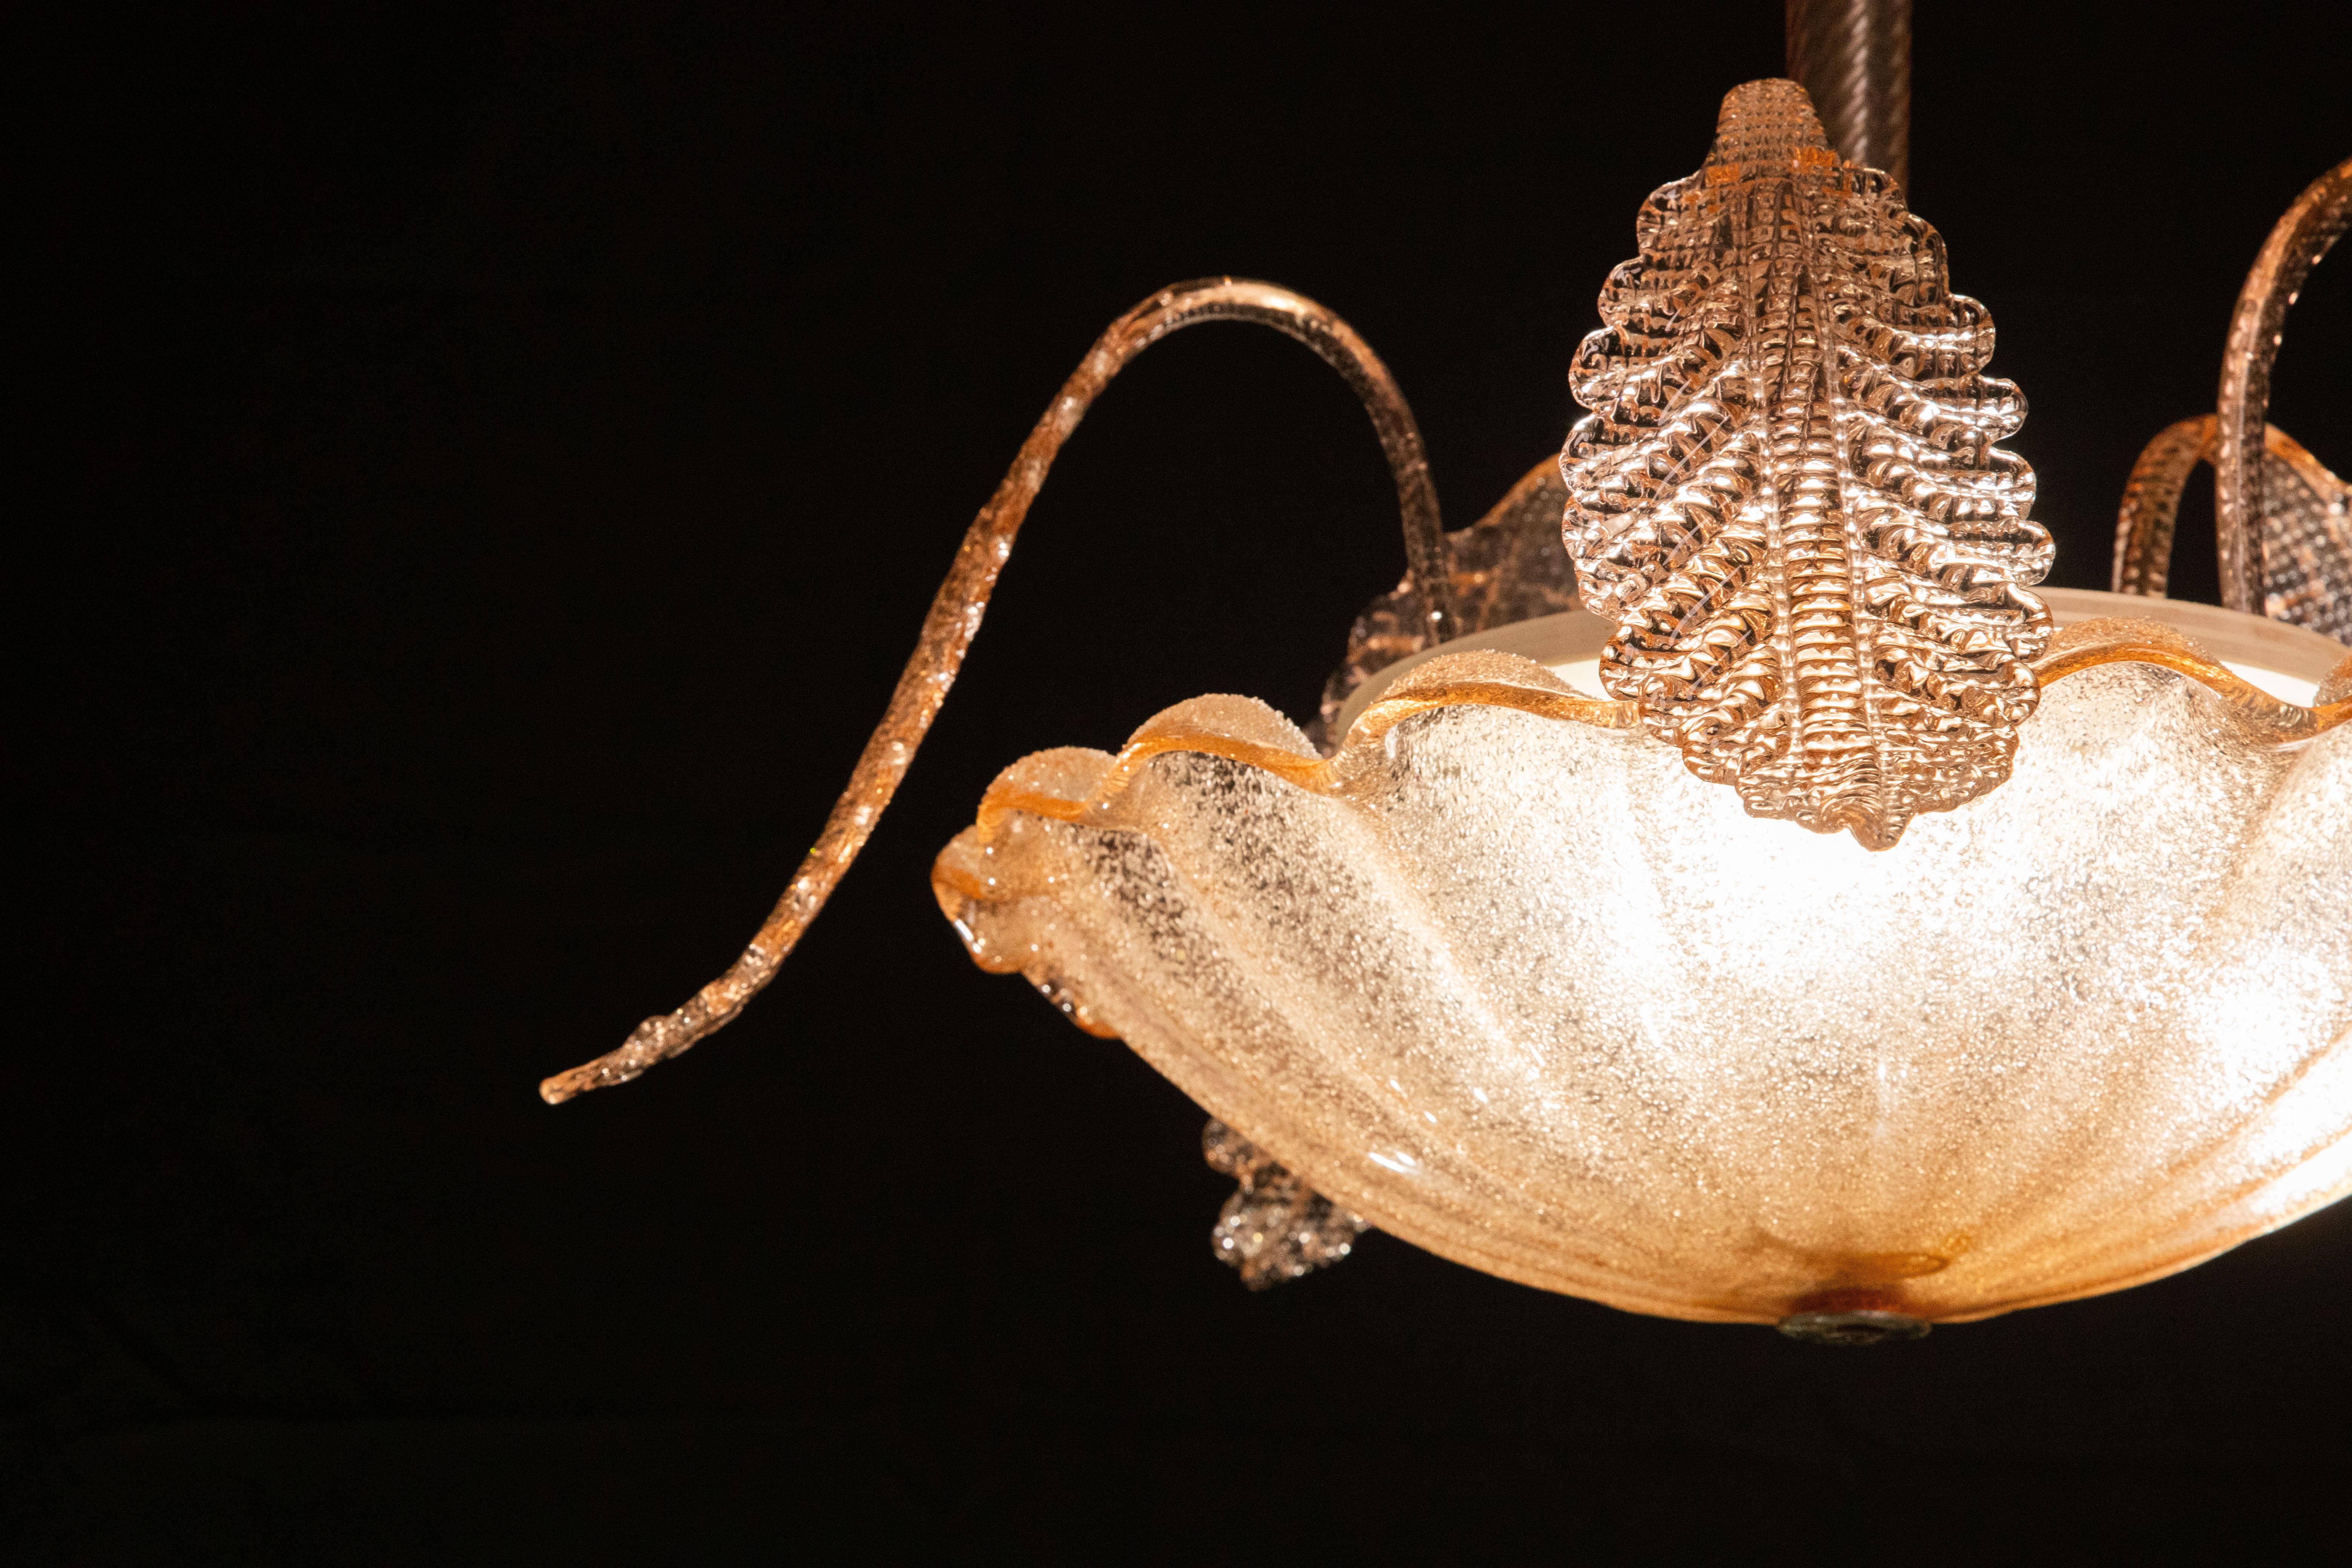 Splendid Murano chandelier made by the Barovier and Toso glassworks in the 1940s, rare 